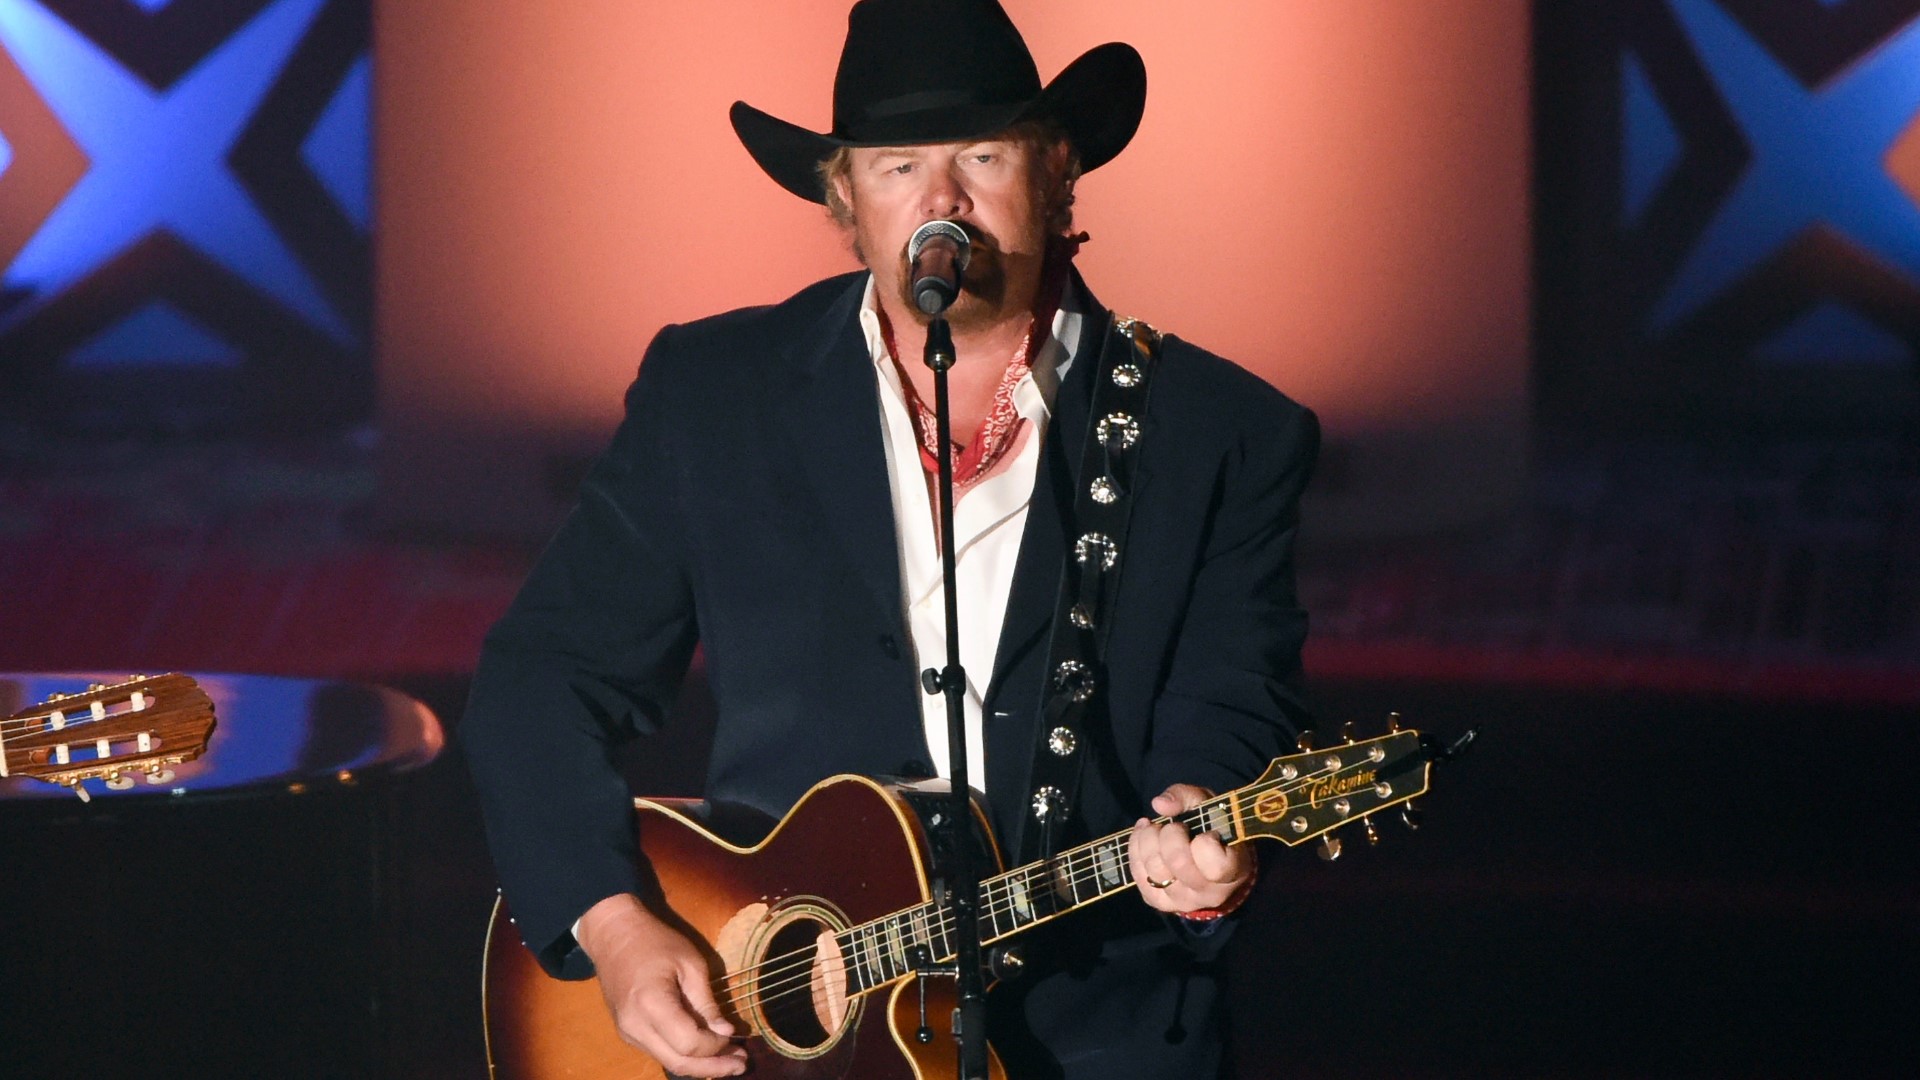 Toby Keith, a hit country crafter of pro-American anthems who both riled up critics and was loved by millions of fans, has died. He was 62.